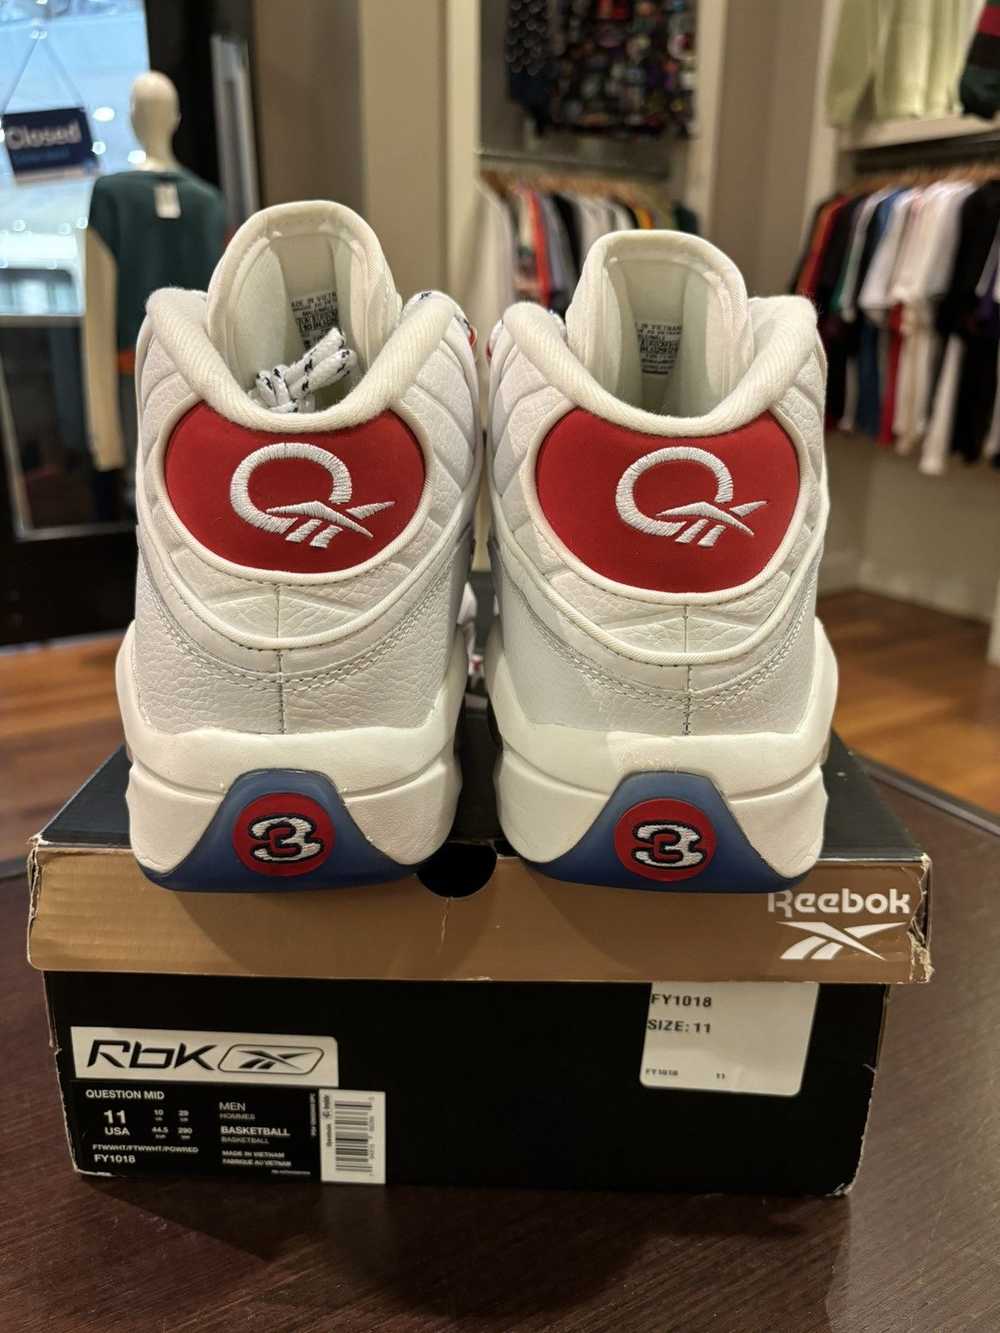 Reebok Reebok question mid white/red - image 6